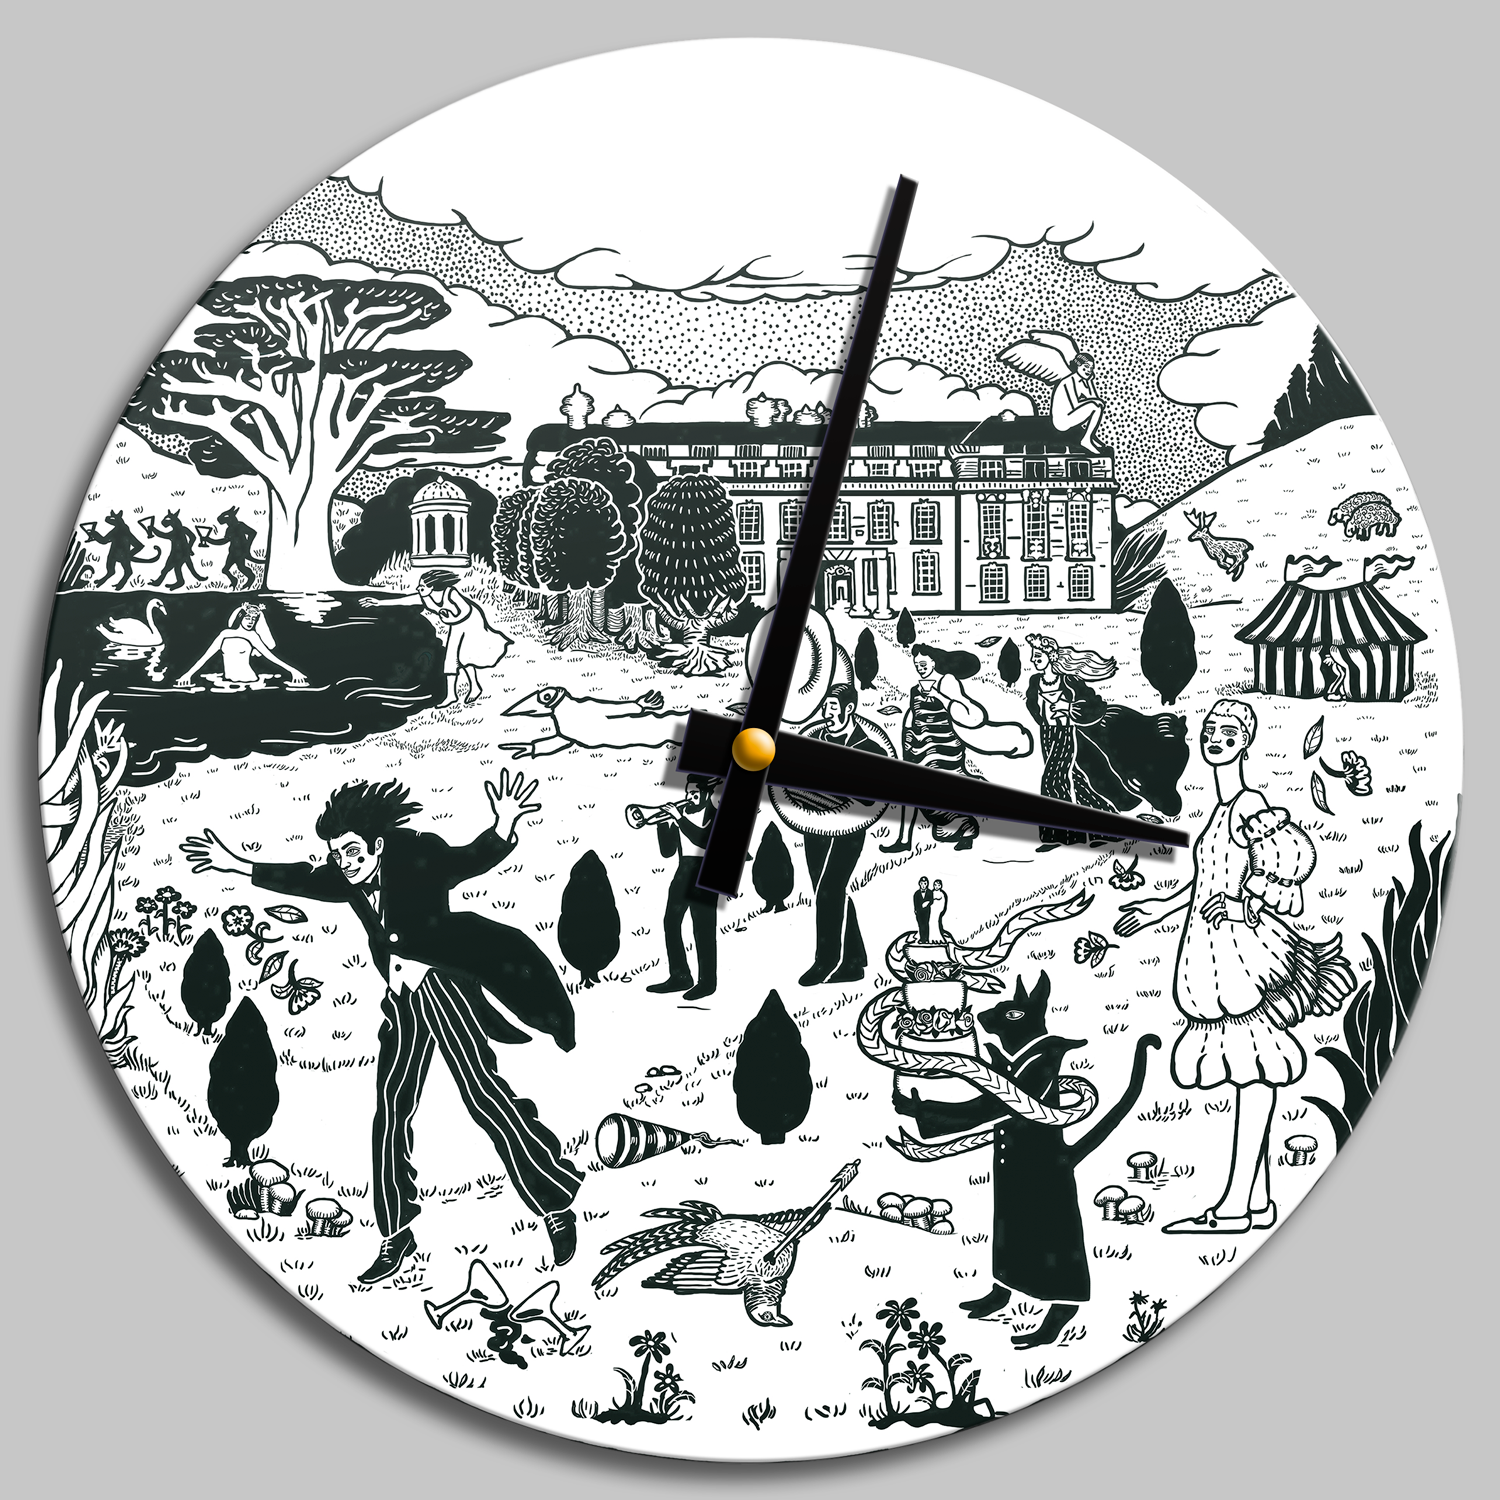 A minamalist wall clock features a black-and-white digital illustration of a lively, Surrealist scene on the grounds of an old English manor. Among trees and the grass, a brass band walks, a man in a formal suit runs crazily, animals and human-animals stands and interact, and a circus tent stands in the distance.